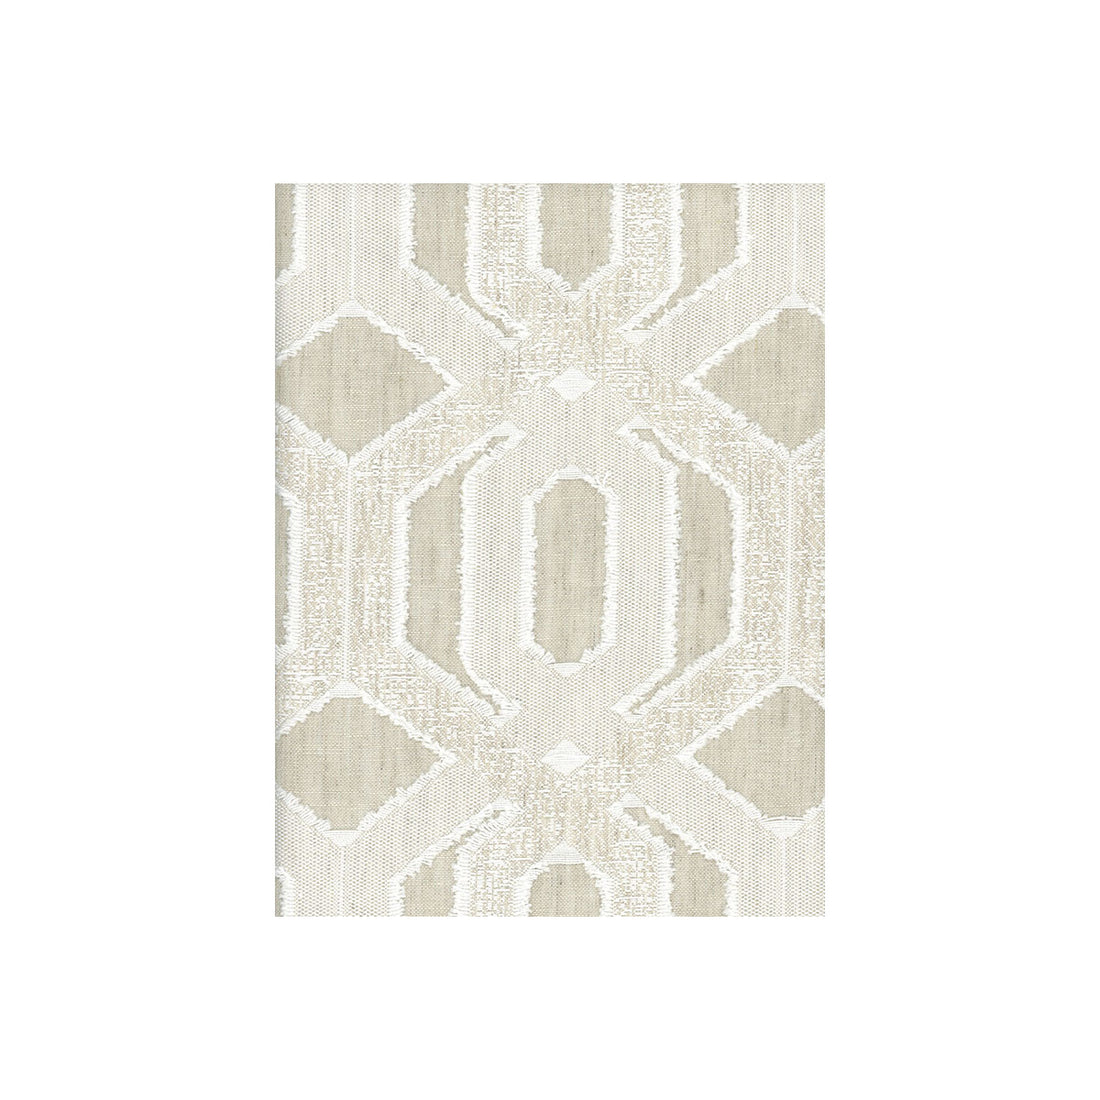 Propeller fabric in natural color - pattern AM100077.16.0 - by Kravet Couture in the Andrew Martin Harbour collection